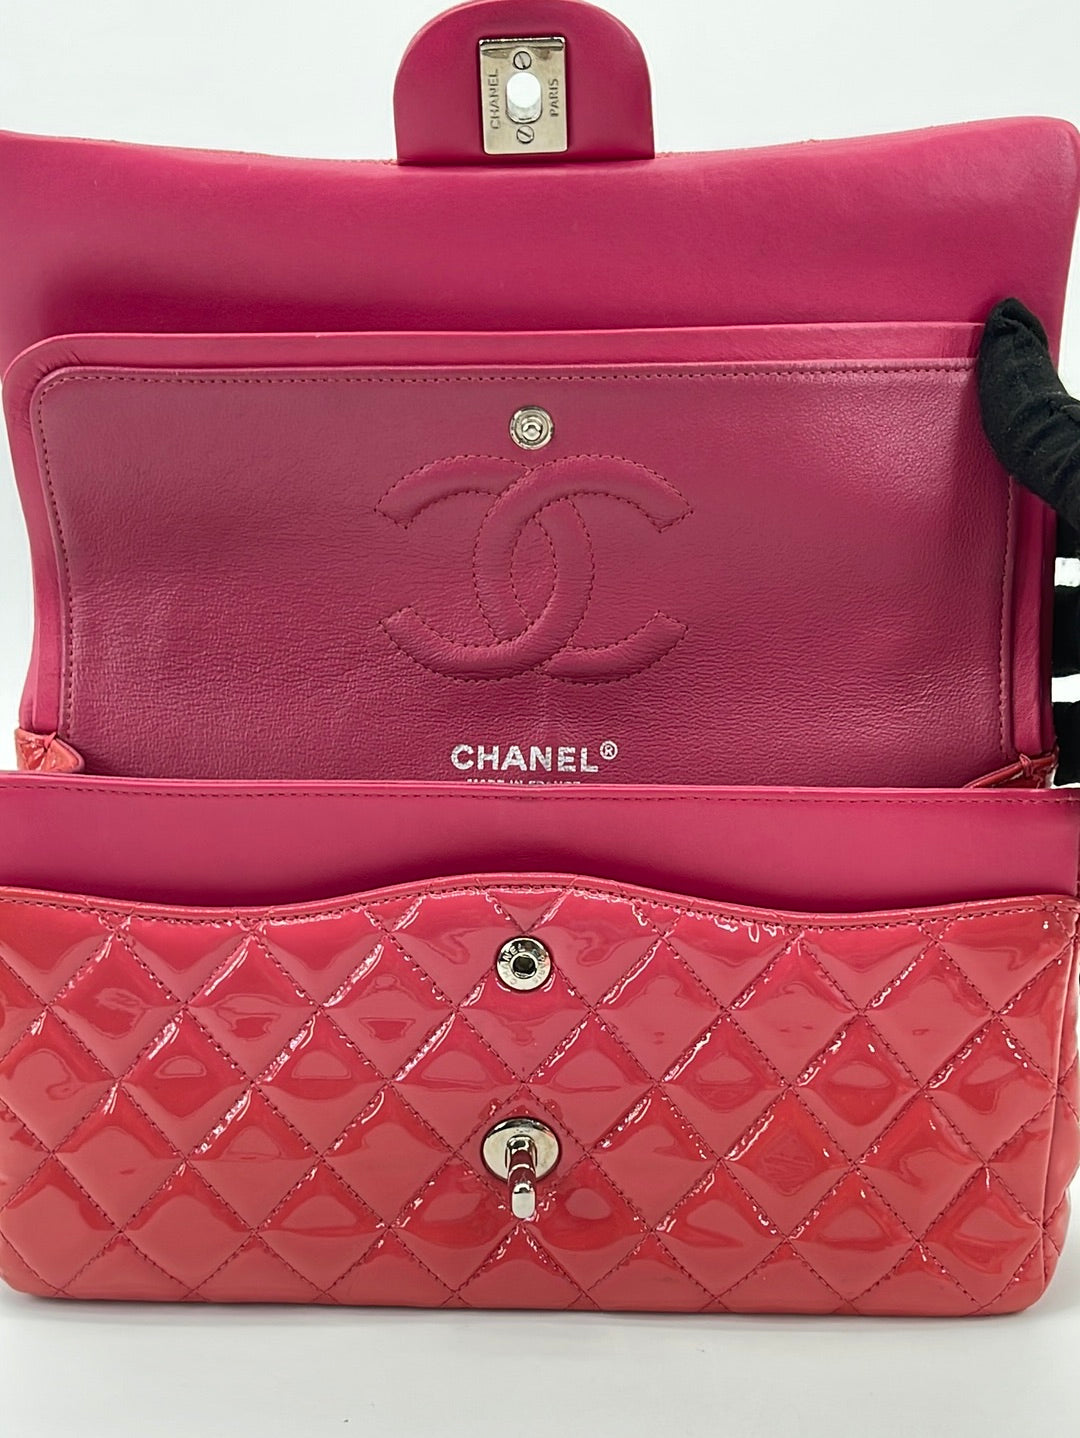 PRELOVED Chanel Quilted Pink Patent Classic Double Flap Medium Bag 19354198 062123 - $1000 OFF LIVWE SHOW - NO ADDITIONAL DISCOUNT